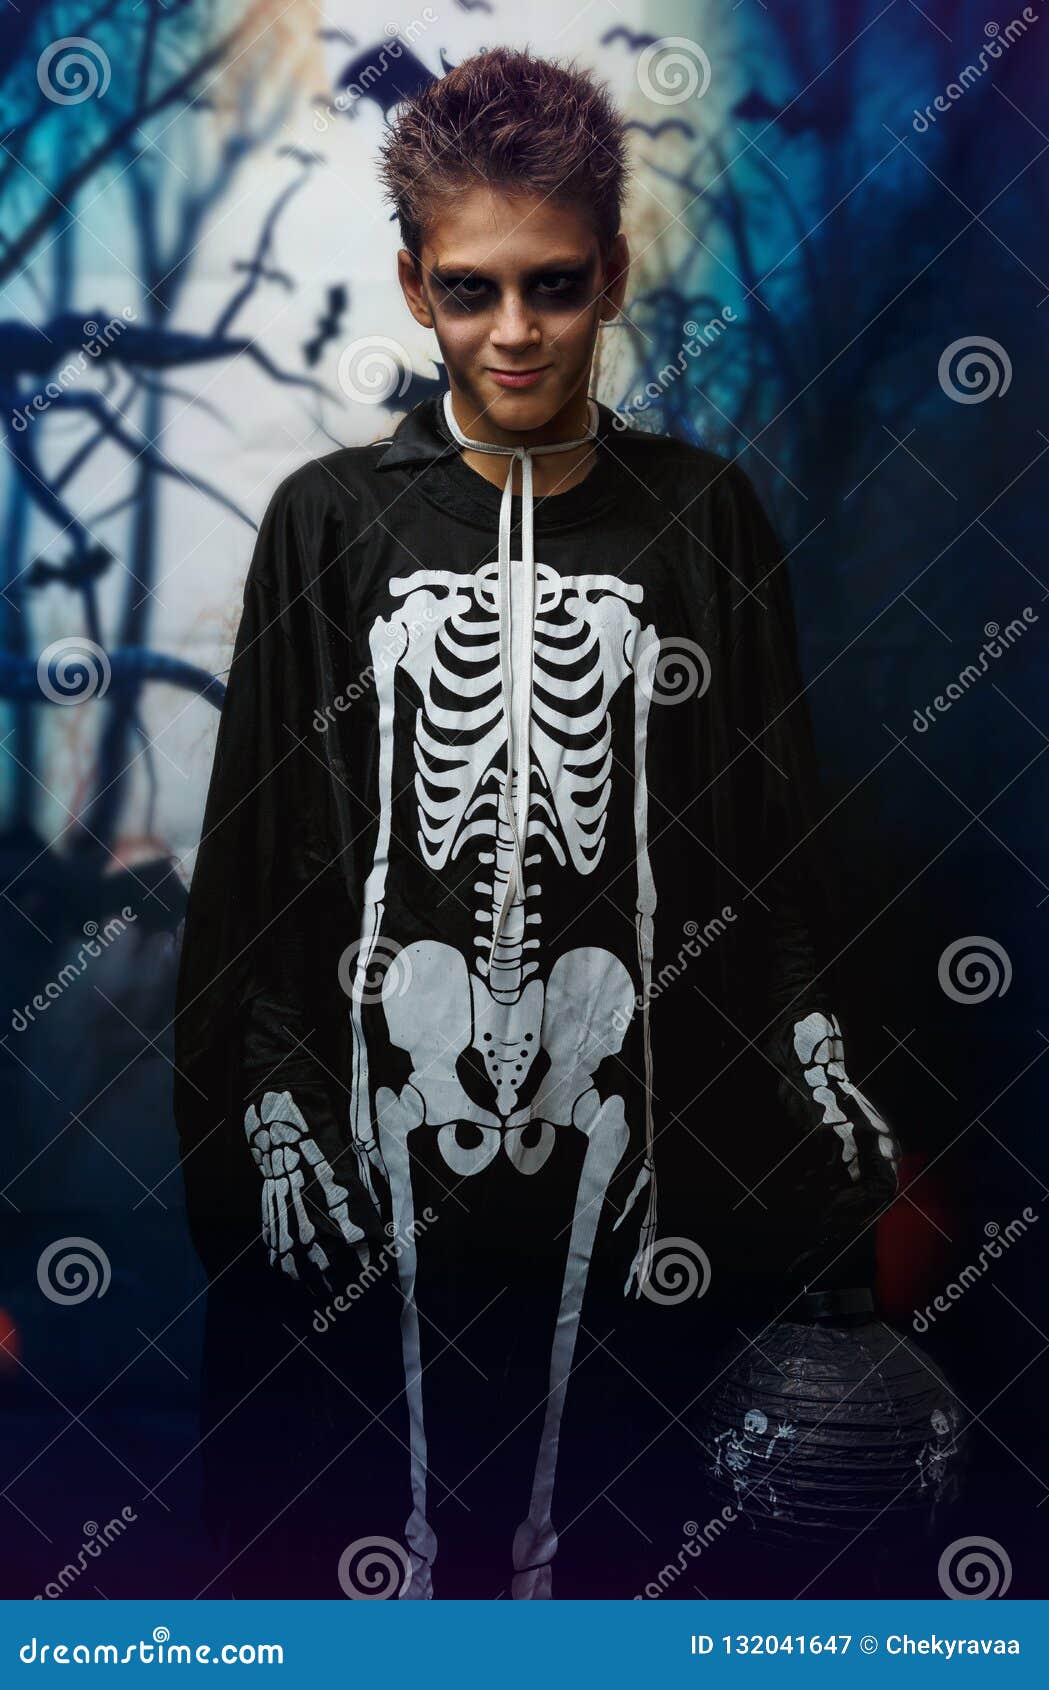 Portrait of Young Boy in Skeleton with Makeup. Celebration of Holiday Halloween, the Boy in Image, the Skeleton Theme Stock Image - Image background, 132041647